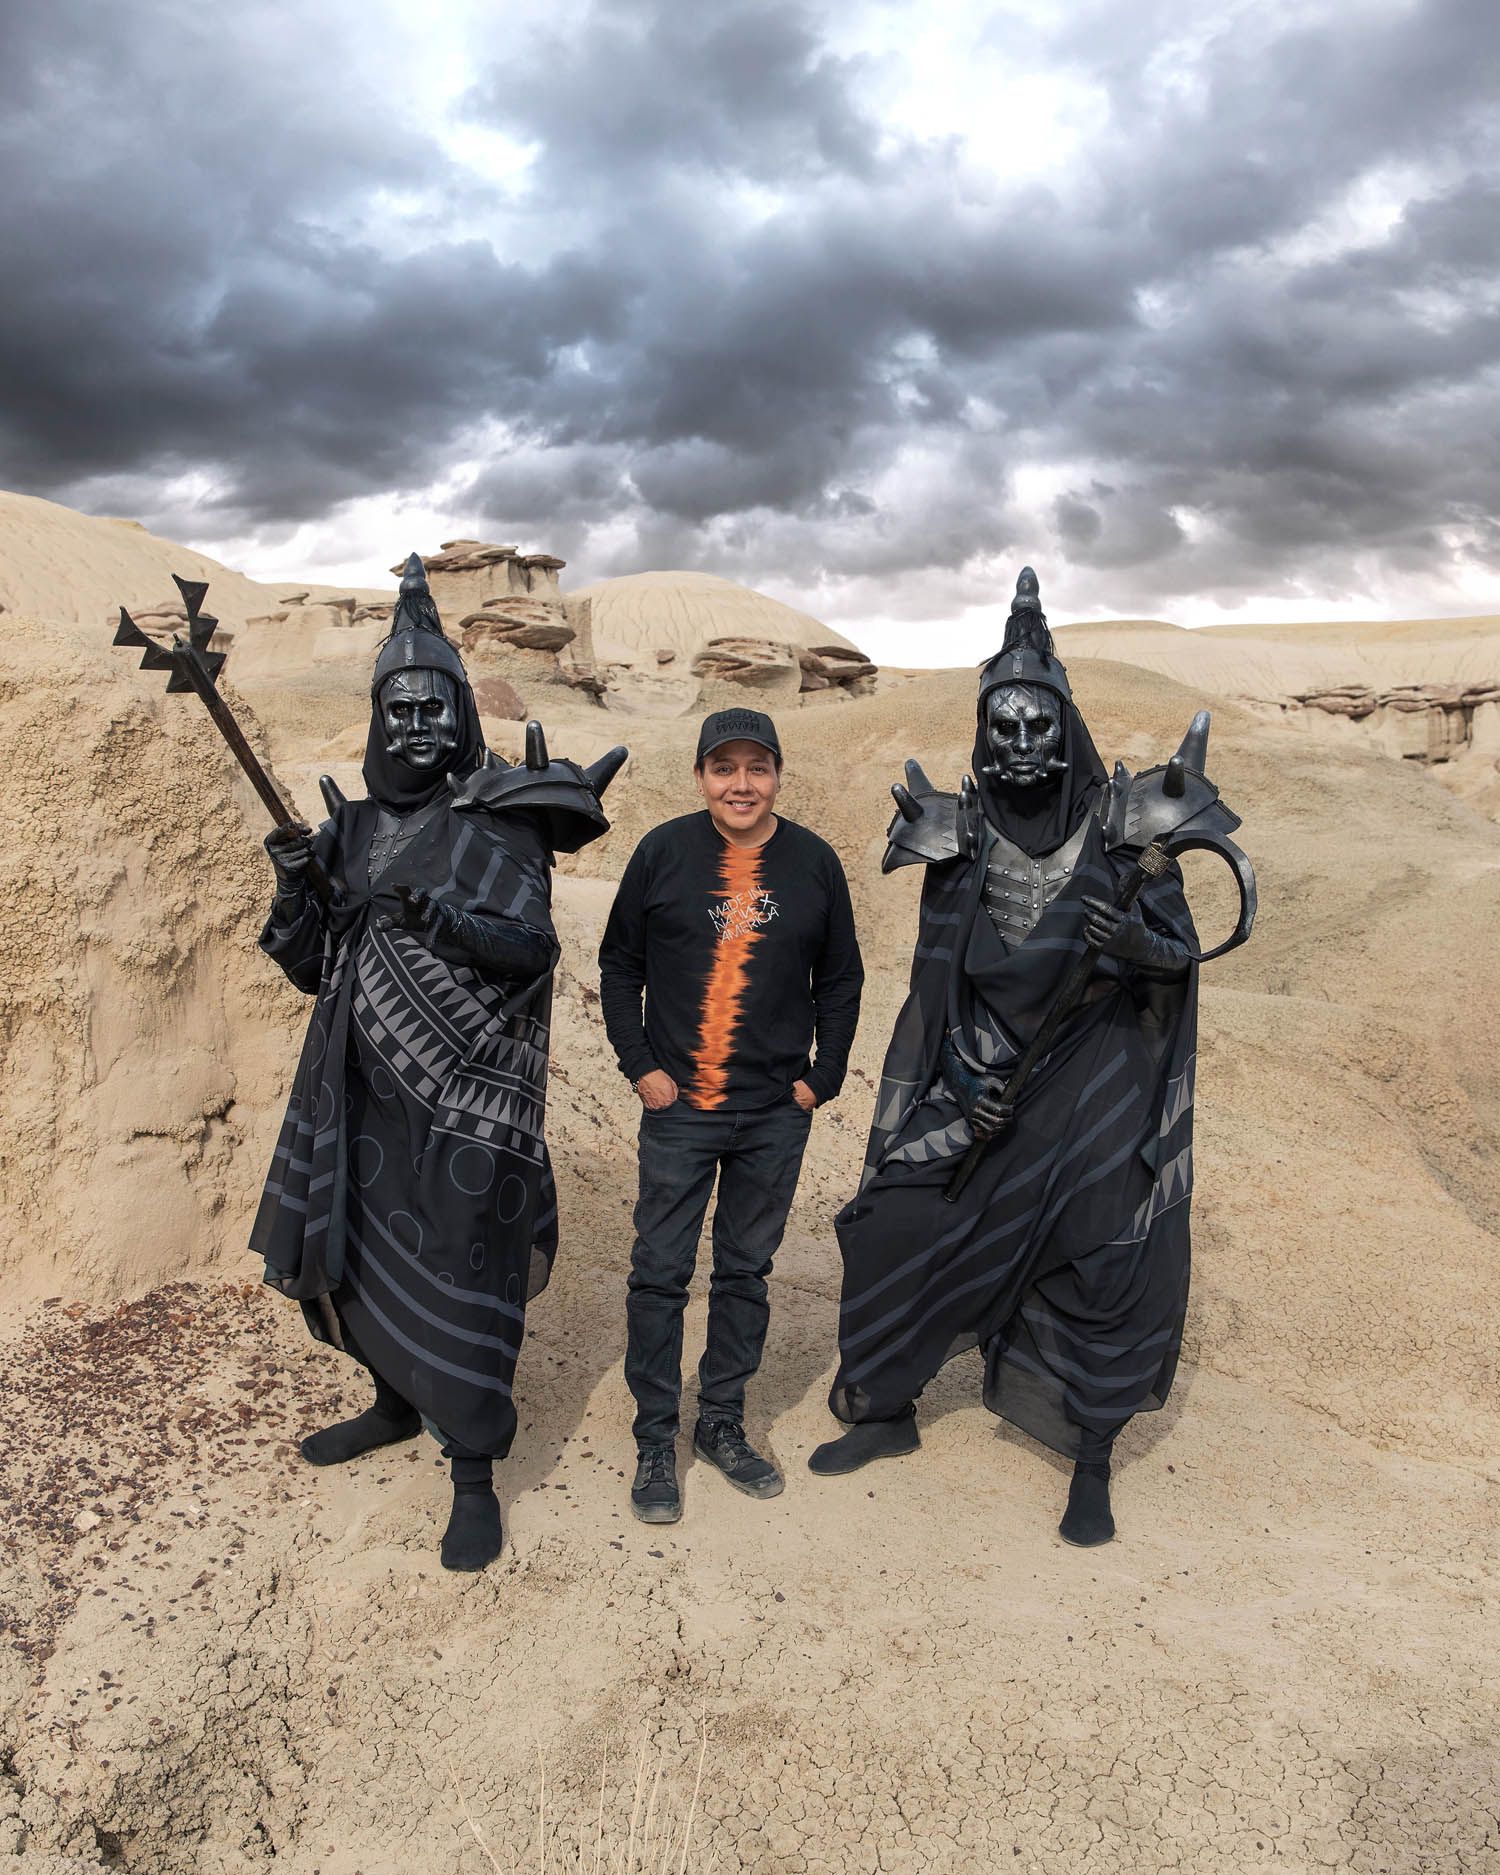 In between takes: Virgil Ortiz with two Recon Watchmen characters, on location at Ah-Shi-Sle-Pah Wilderness, New Mexico. Photo by Kamden Storm.